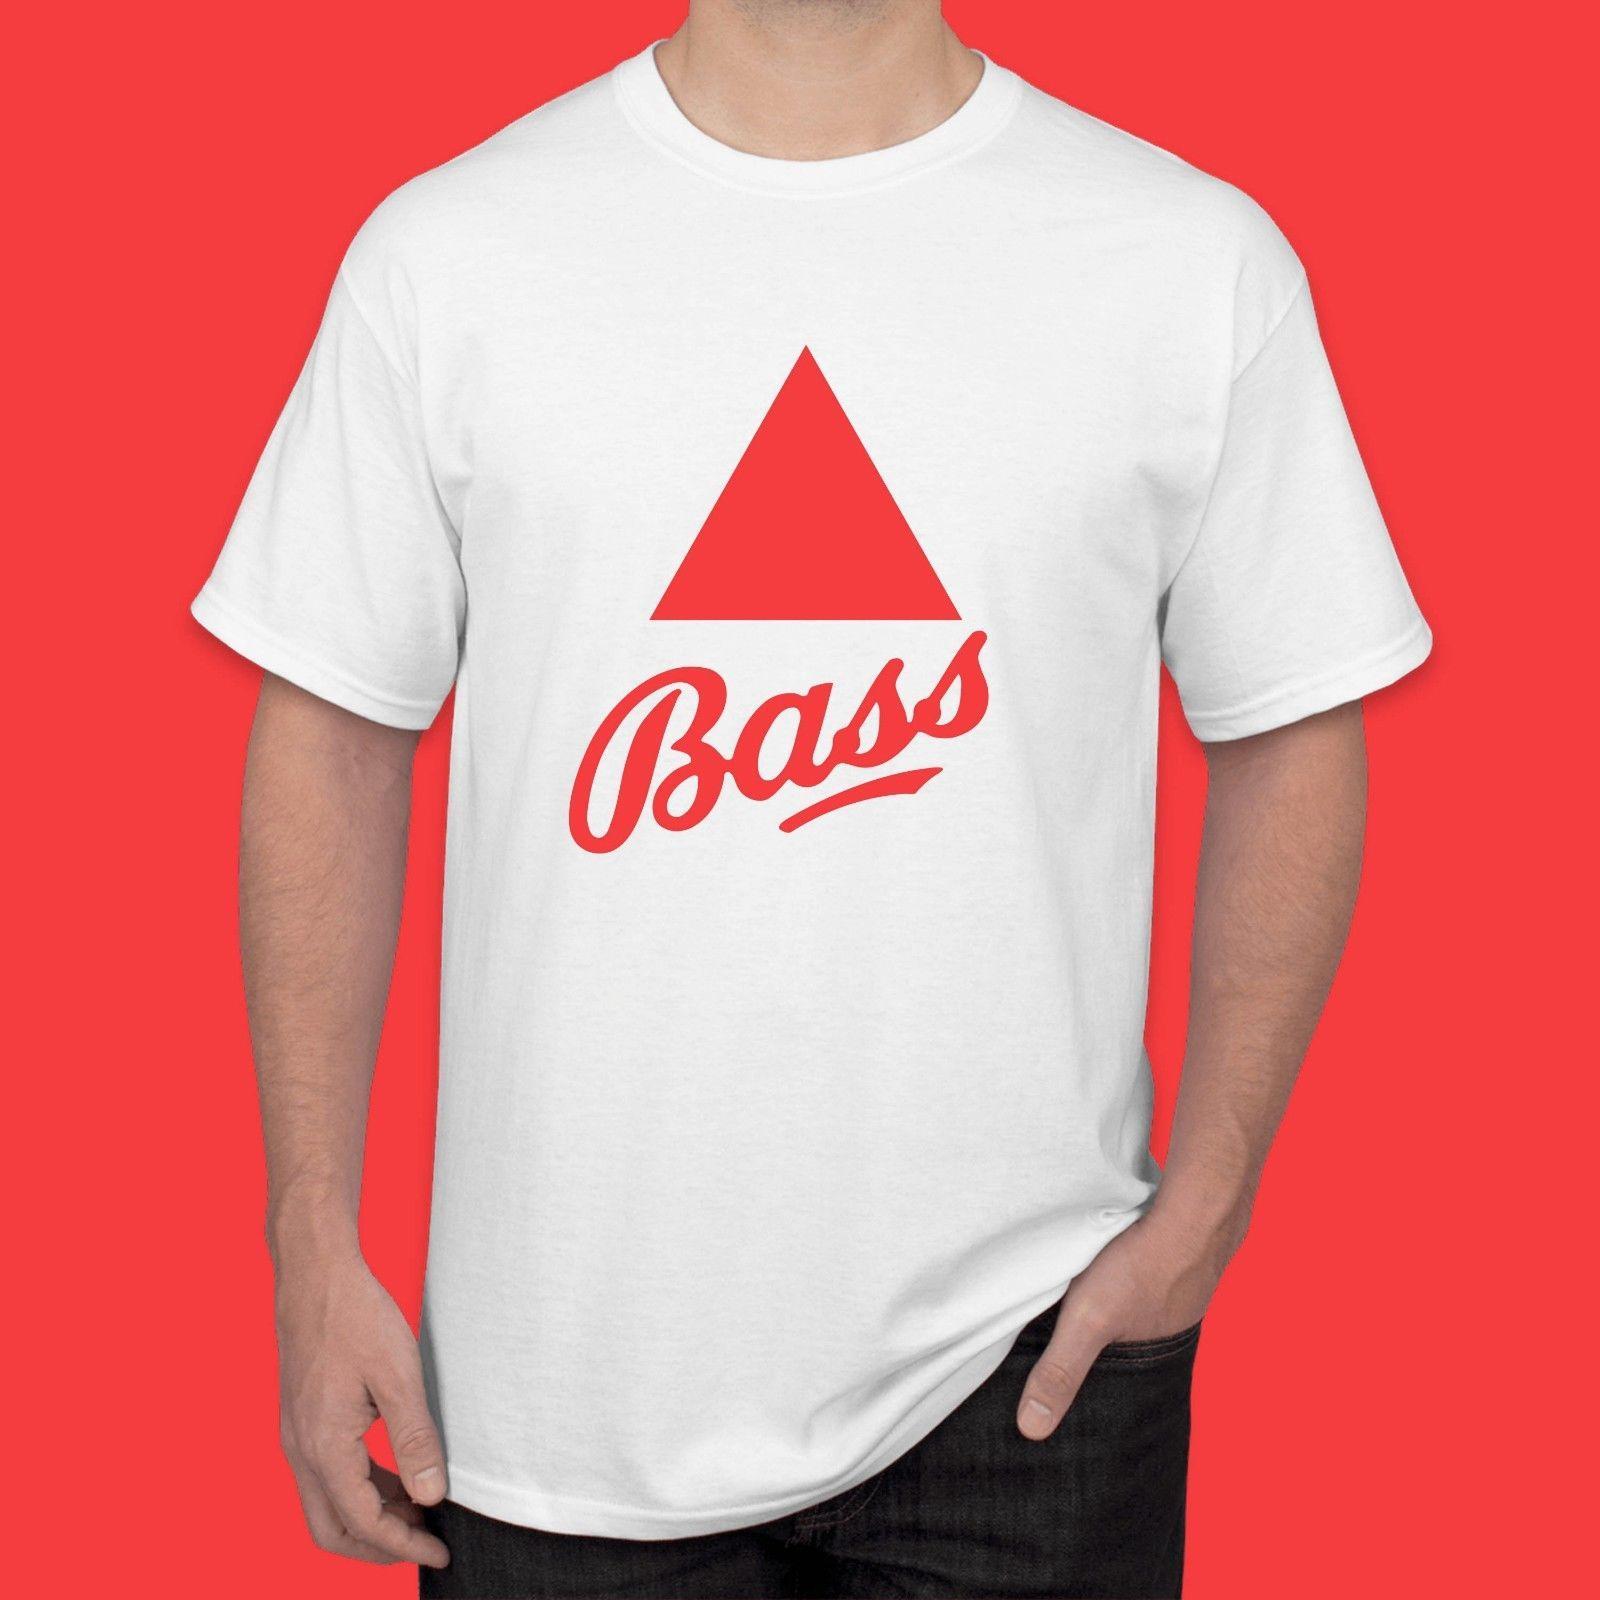 Bass Beer Logo - New Bass Ale Beer Brewing Red Logo Men'S Tee White T Shirt Sizes